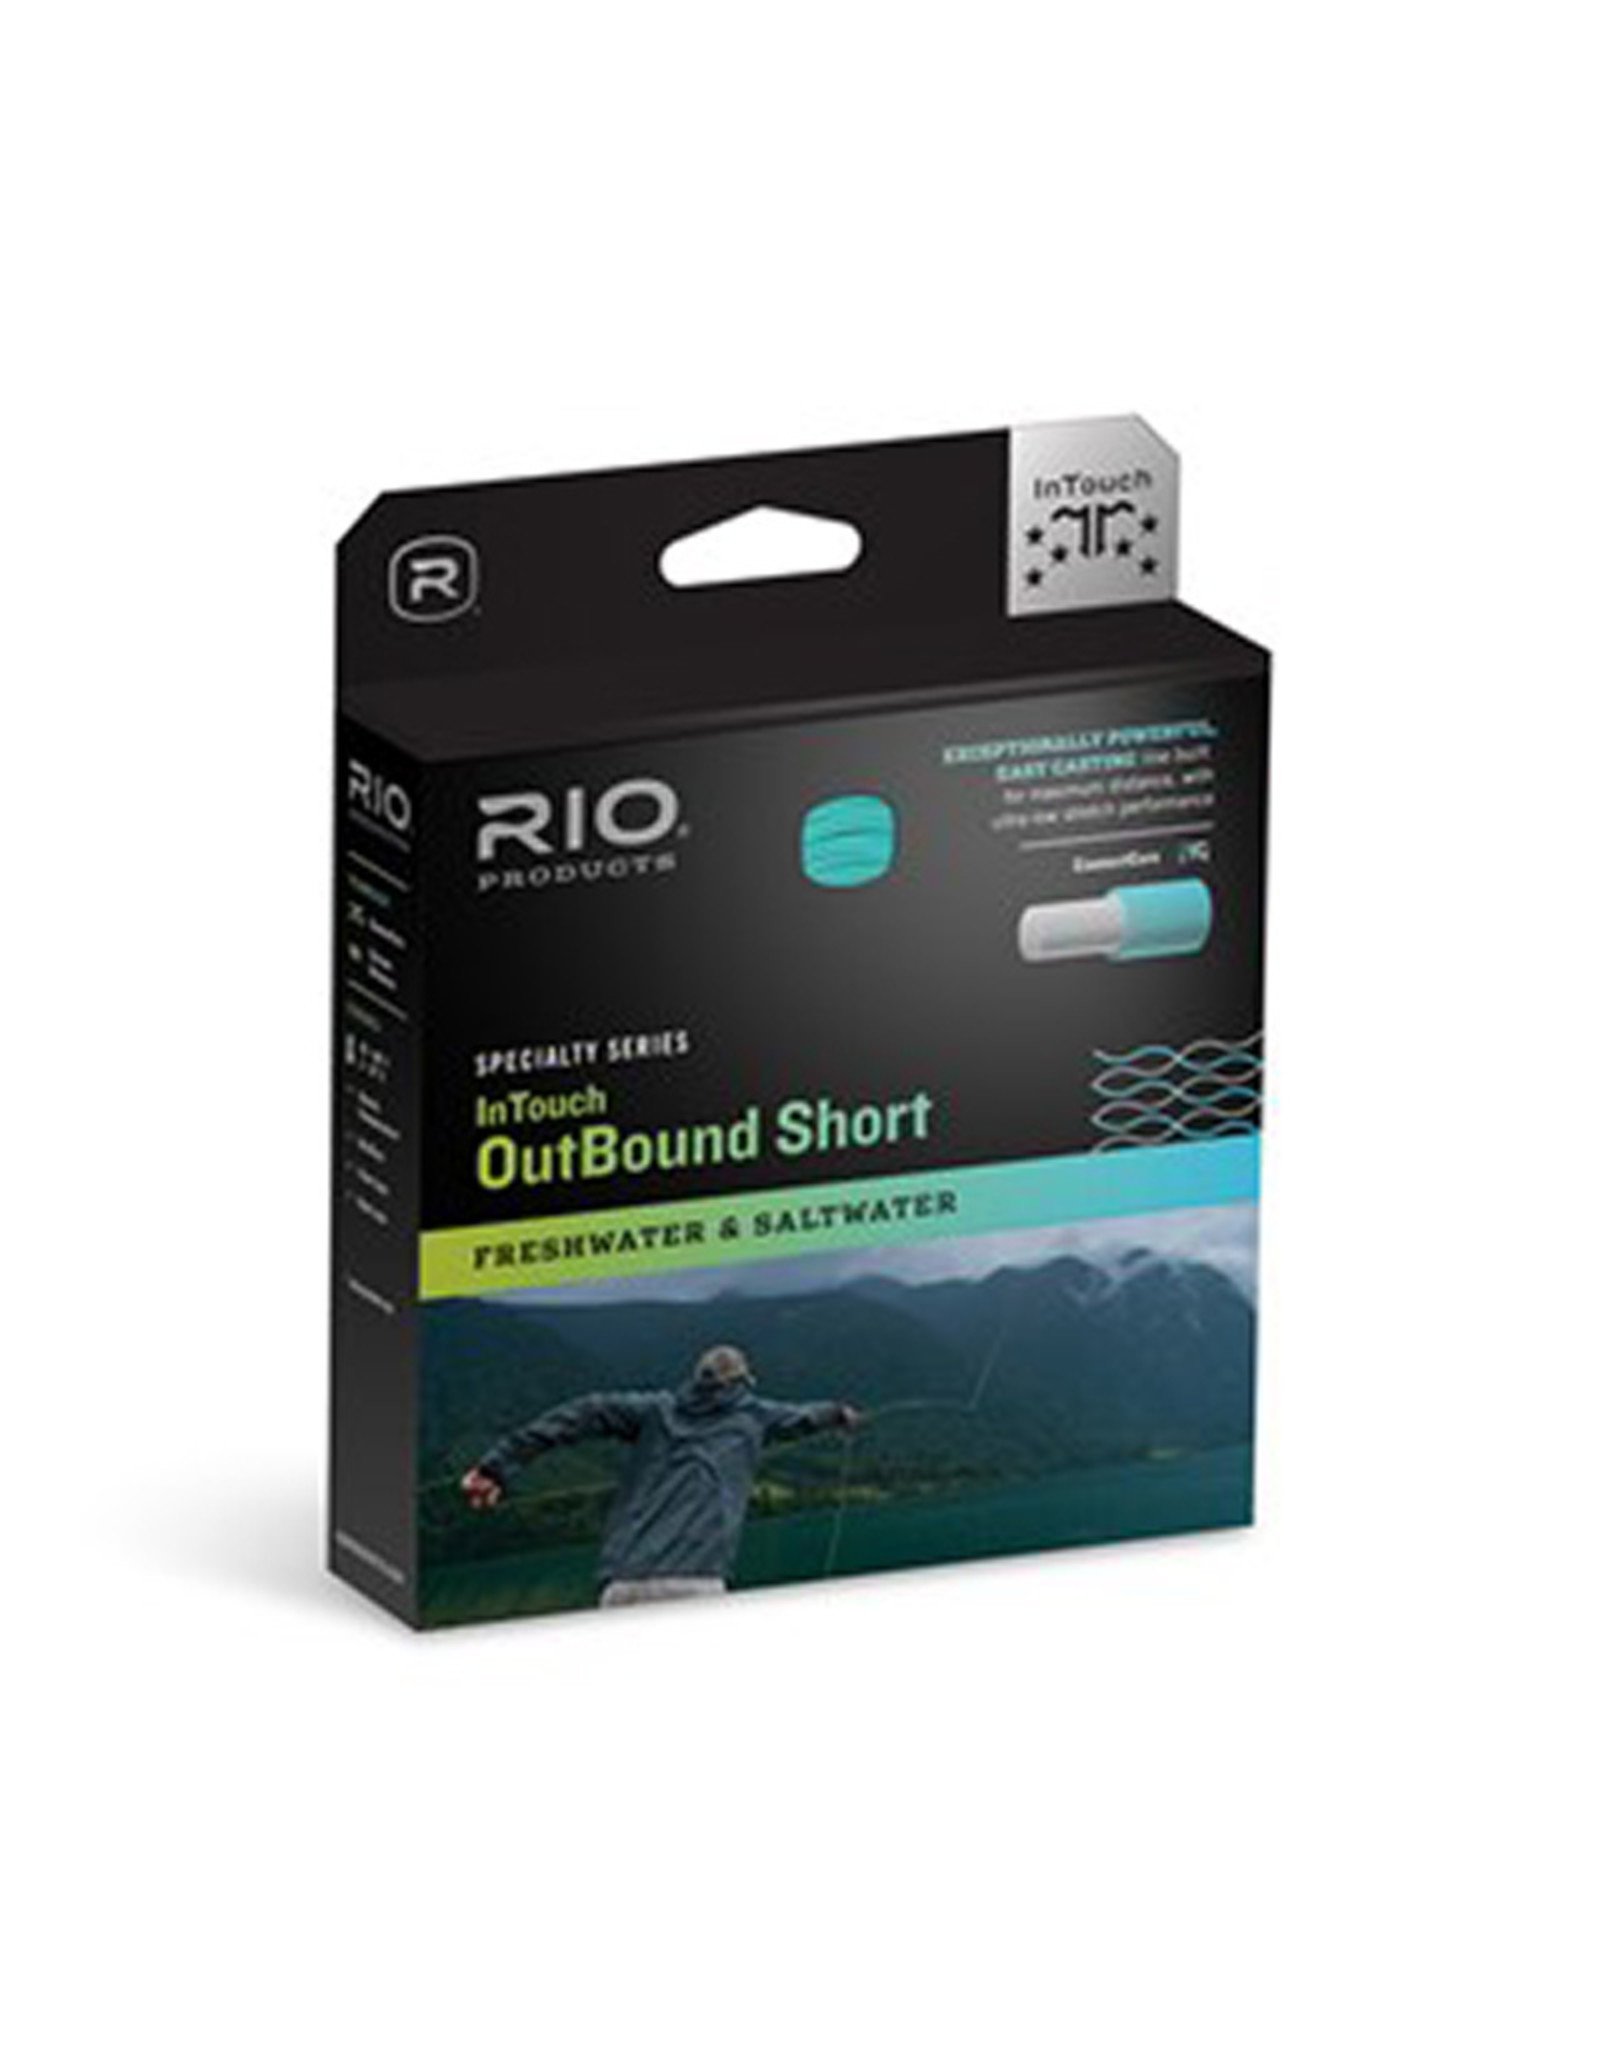 RIO Products InTouch OutBound Short F/S1